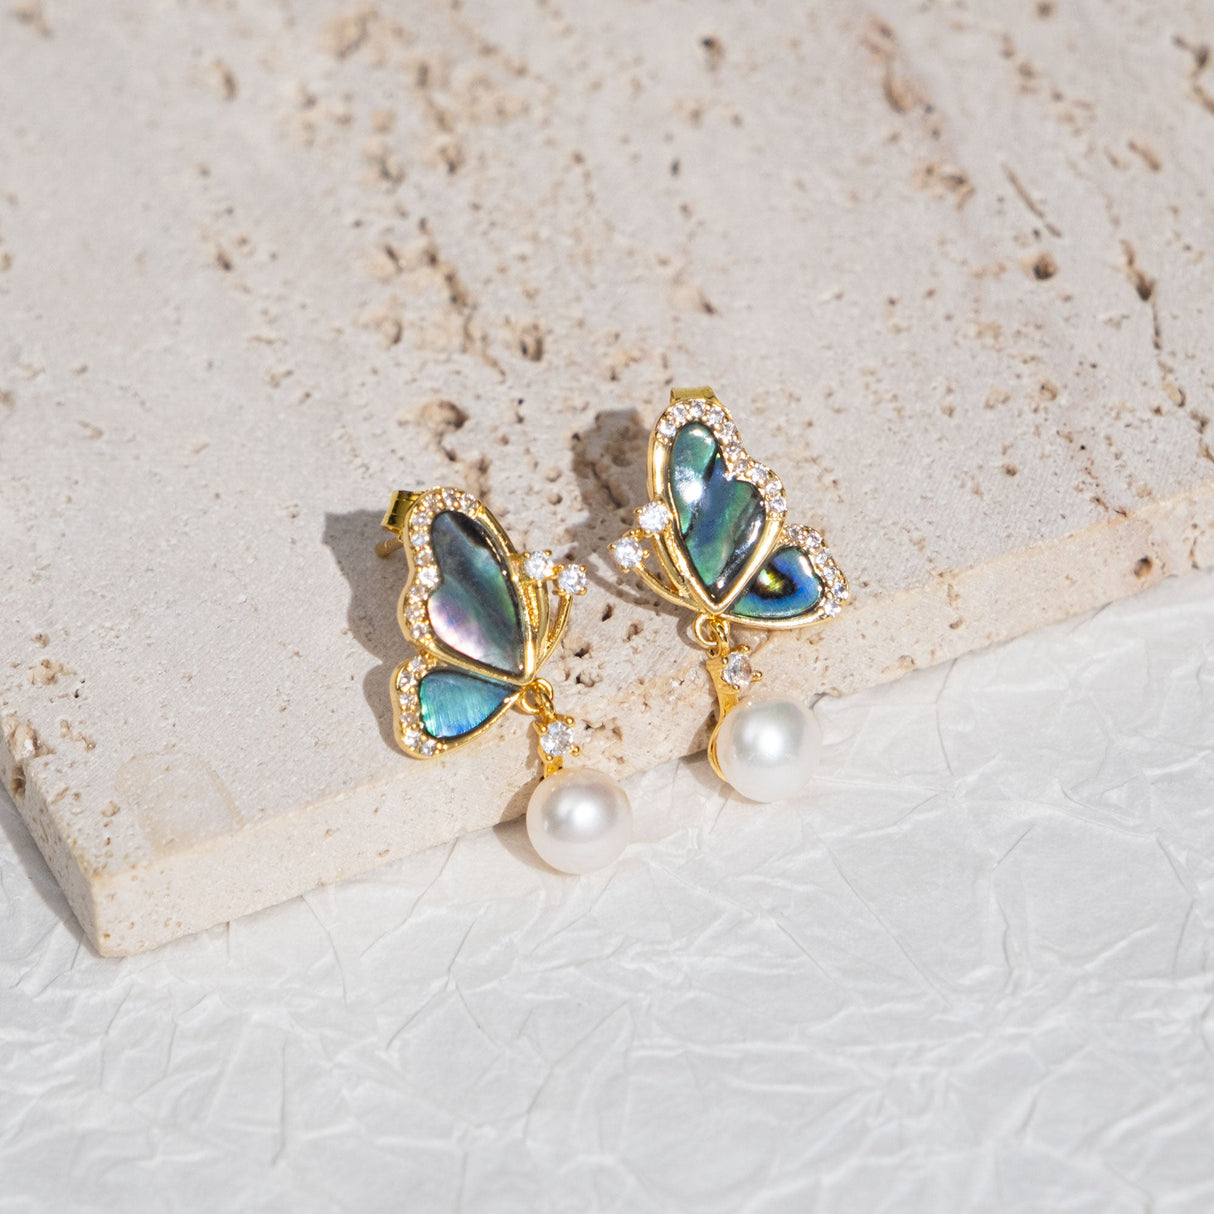 BURLAP LIFE Freshwater Pearl Abalone Shell Earrings Gold Plated 925 Silver (Half Butterfly) - GexWorldwide